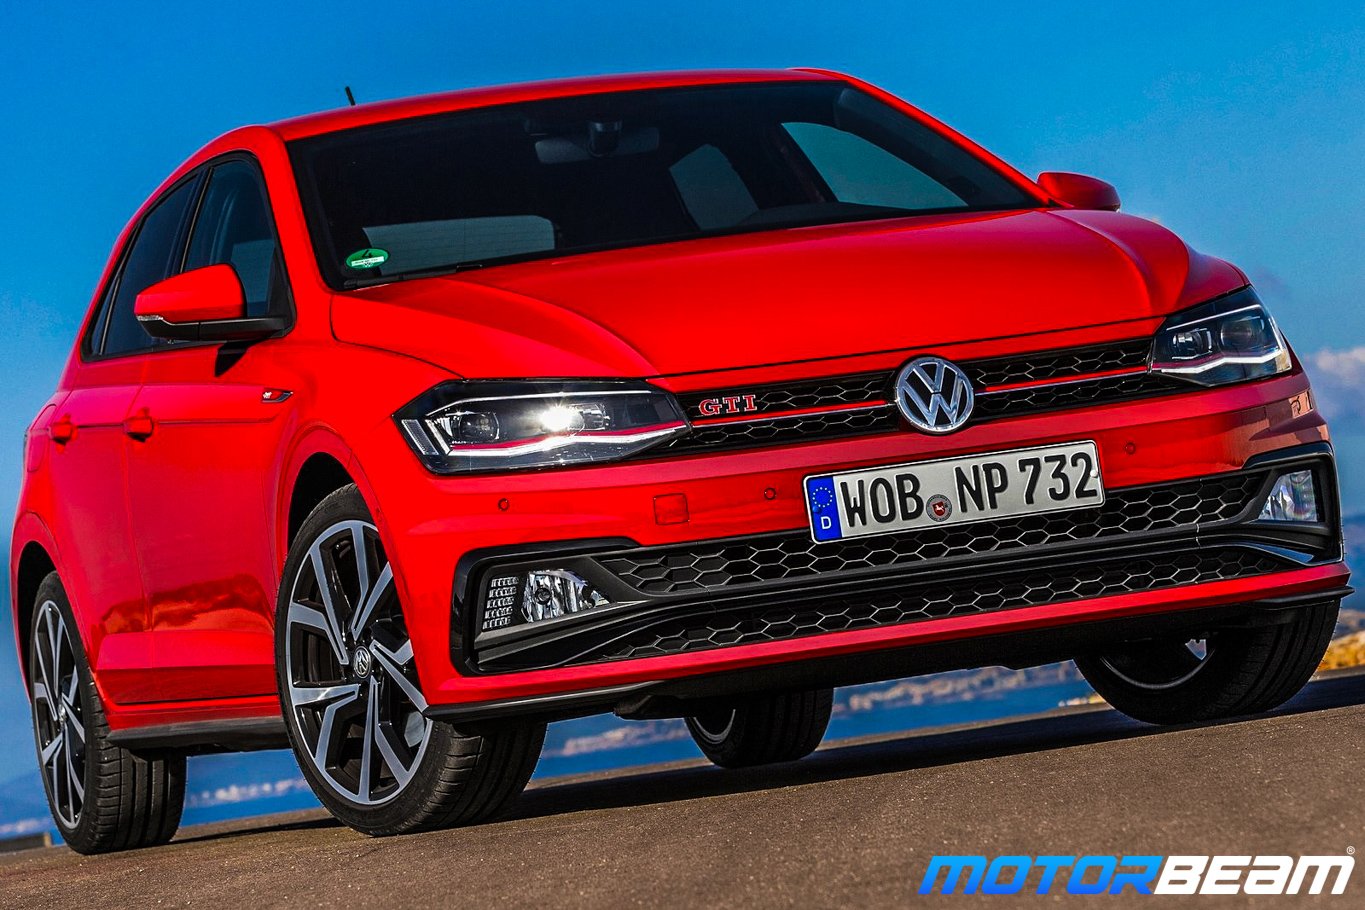 Volkswagen Polo GTI review, Car review